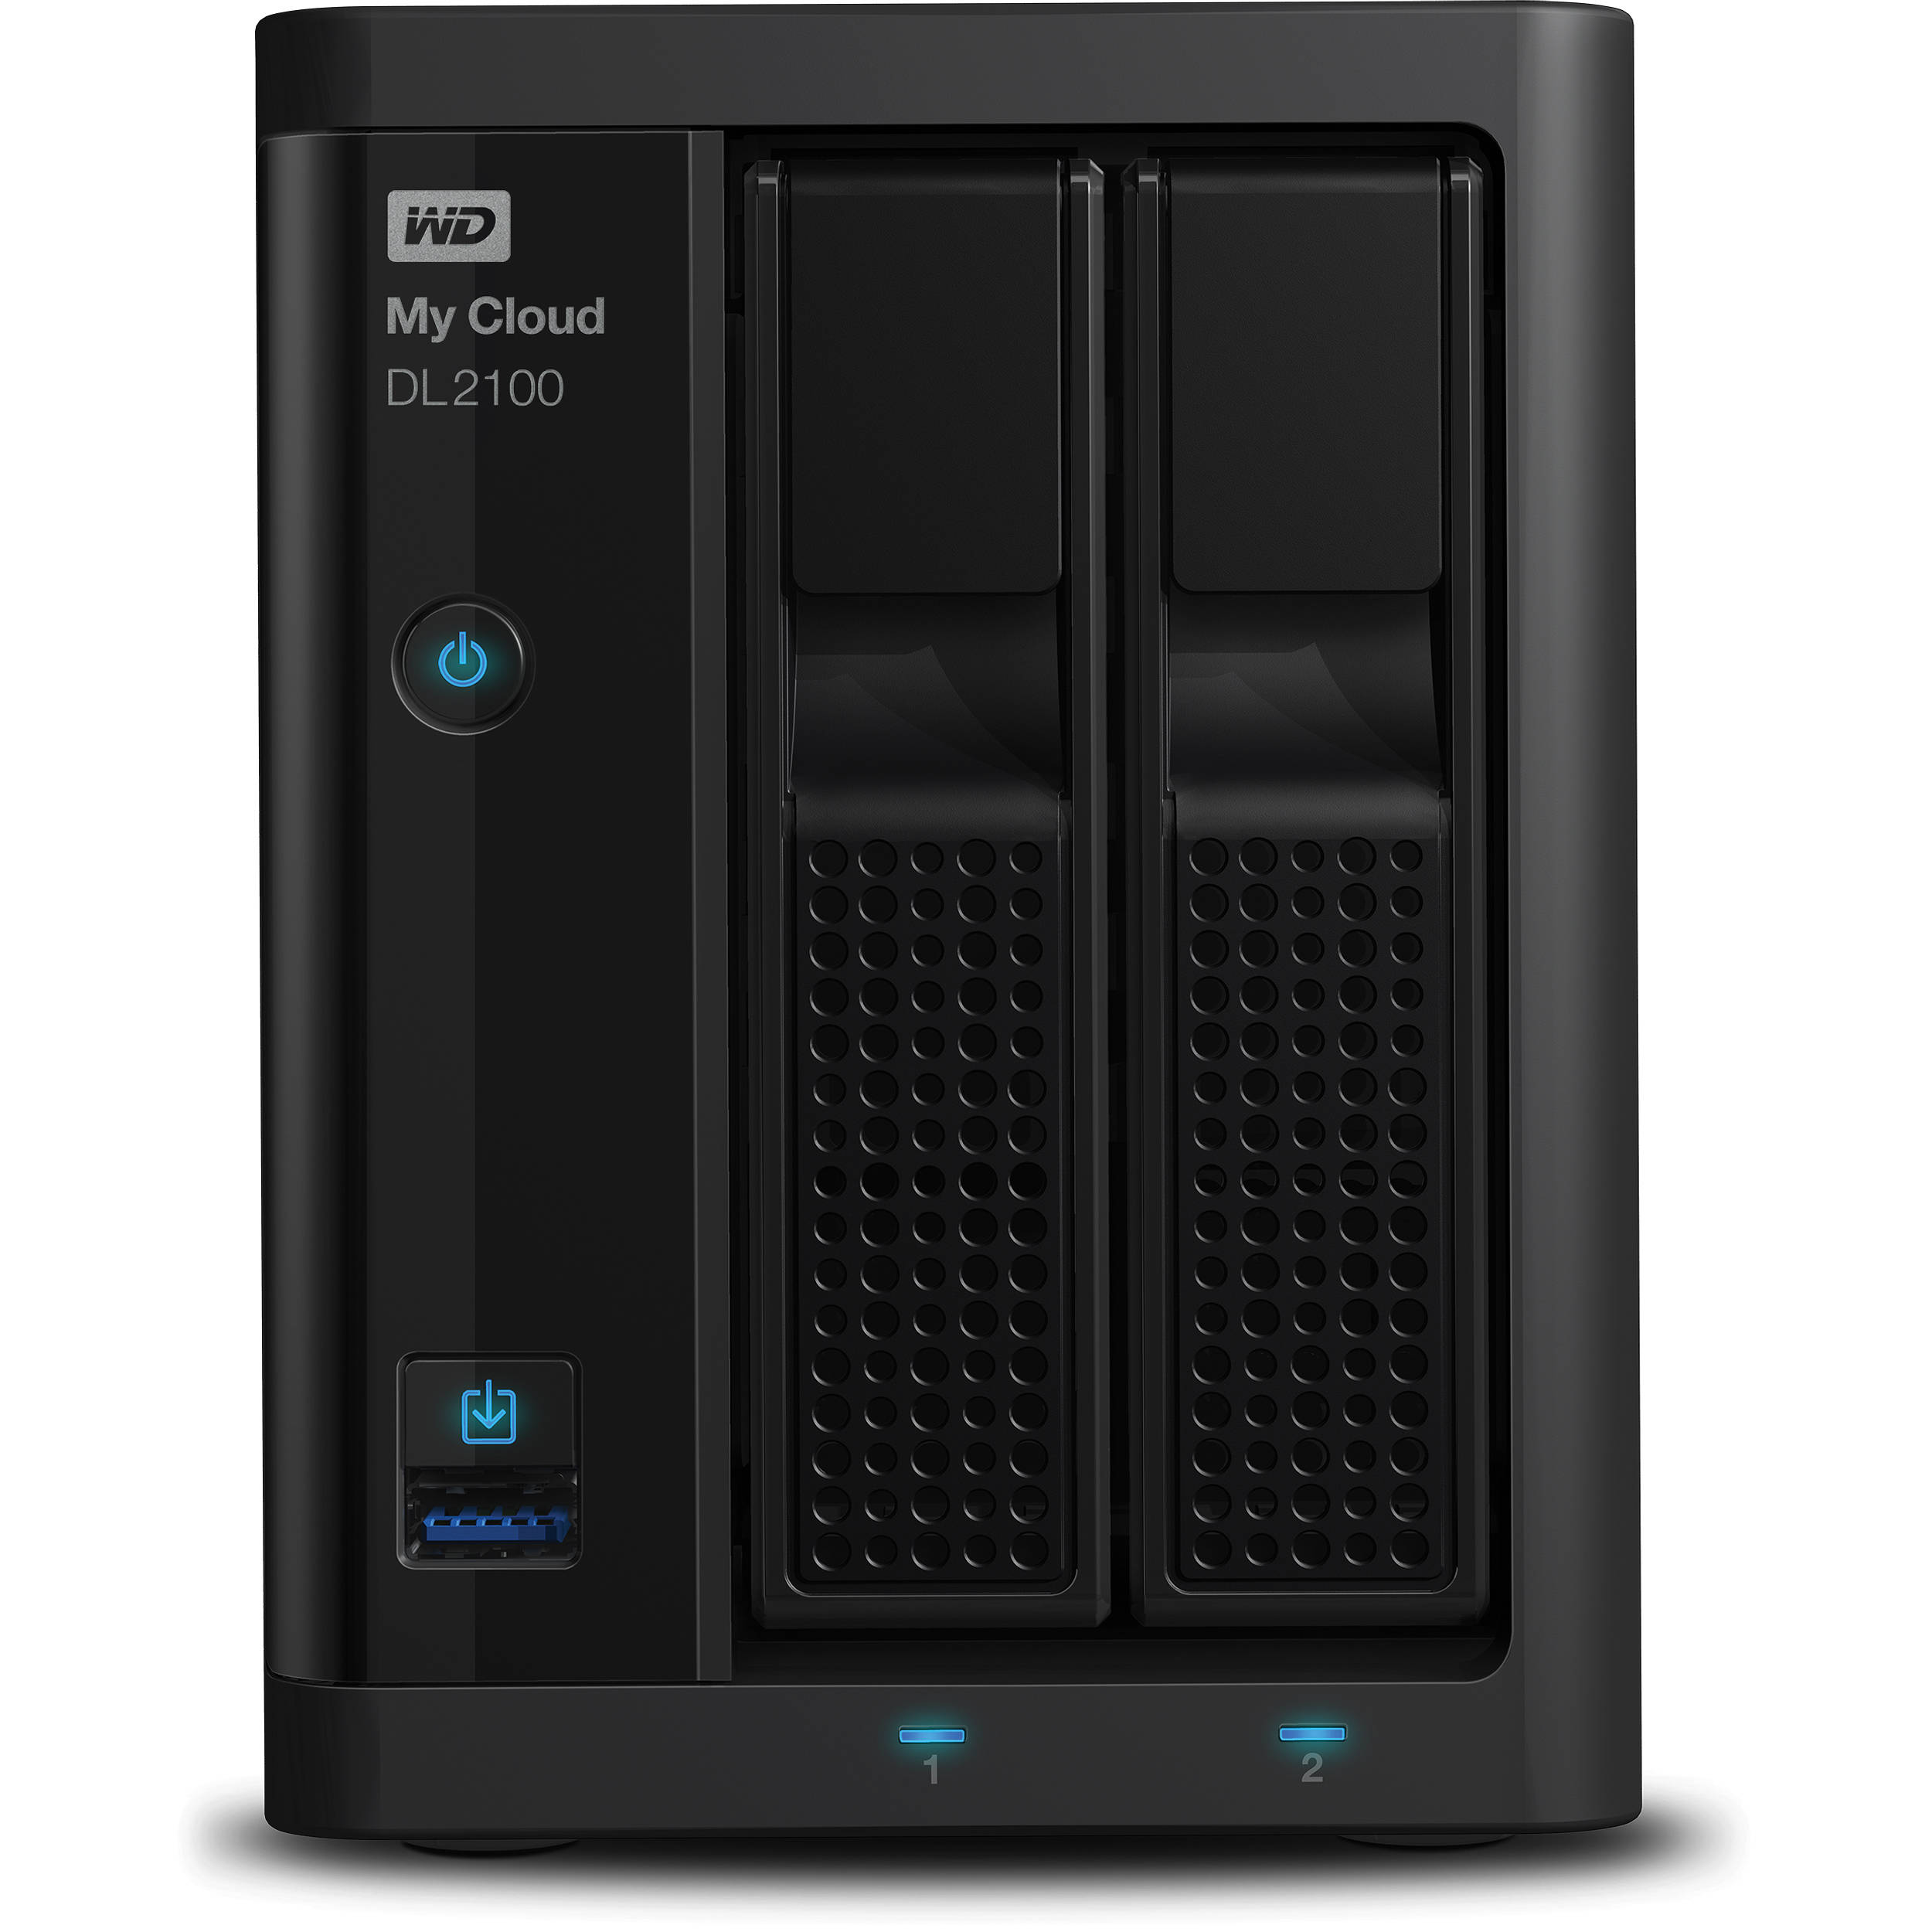 WD My Cloud Business Series 8TB 2-Bay Pre-Configured NAS with Intel Processor